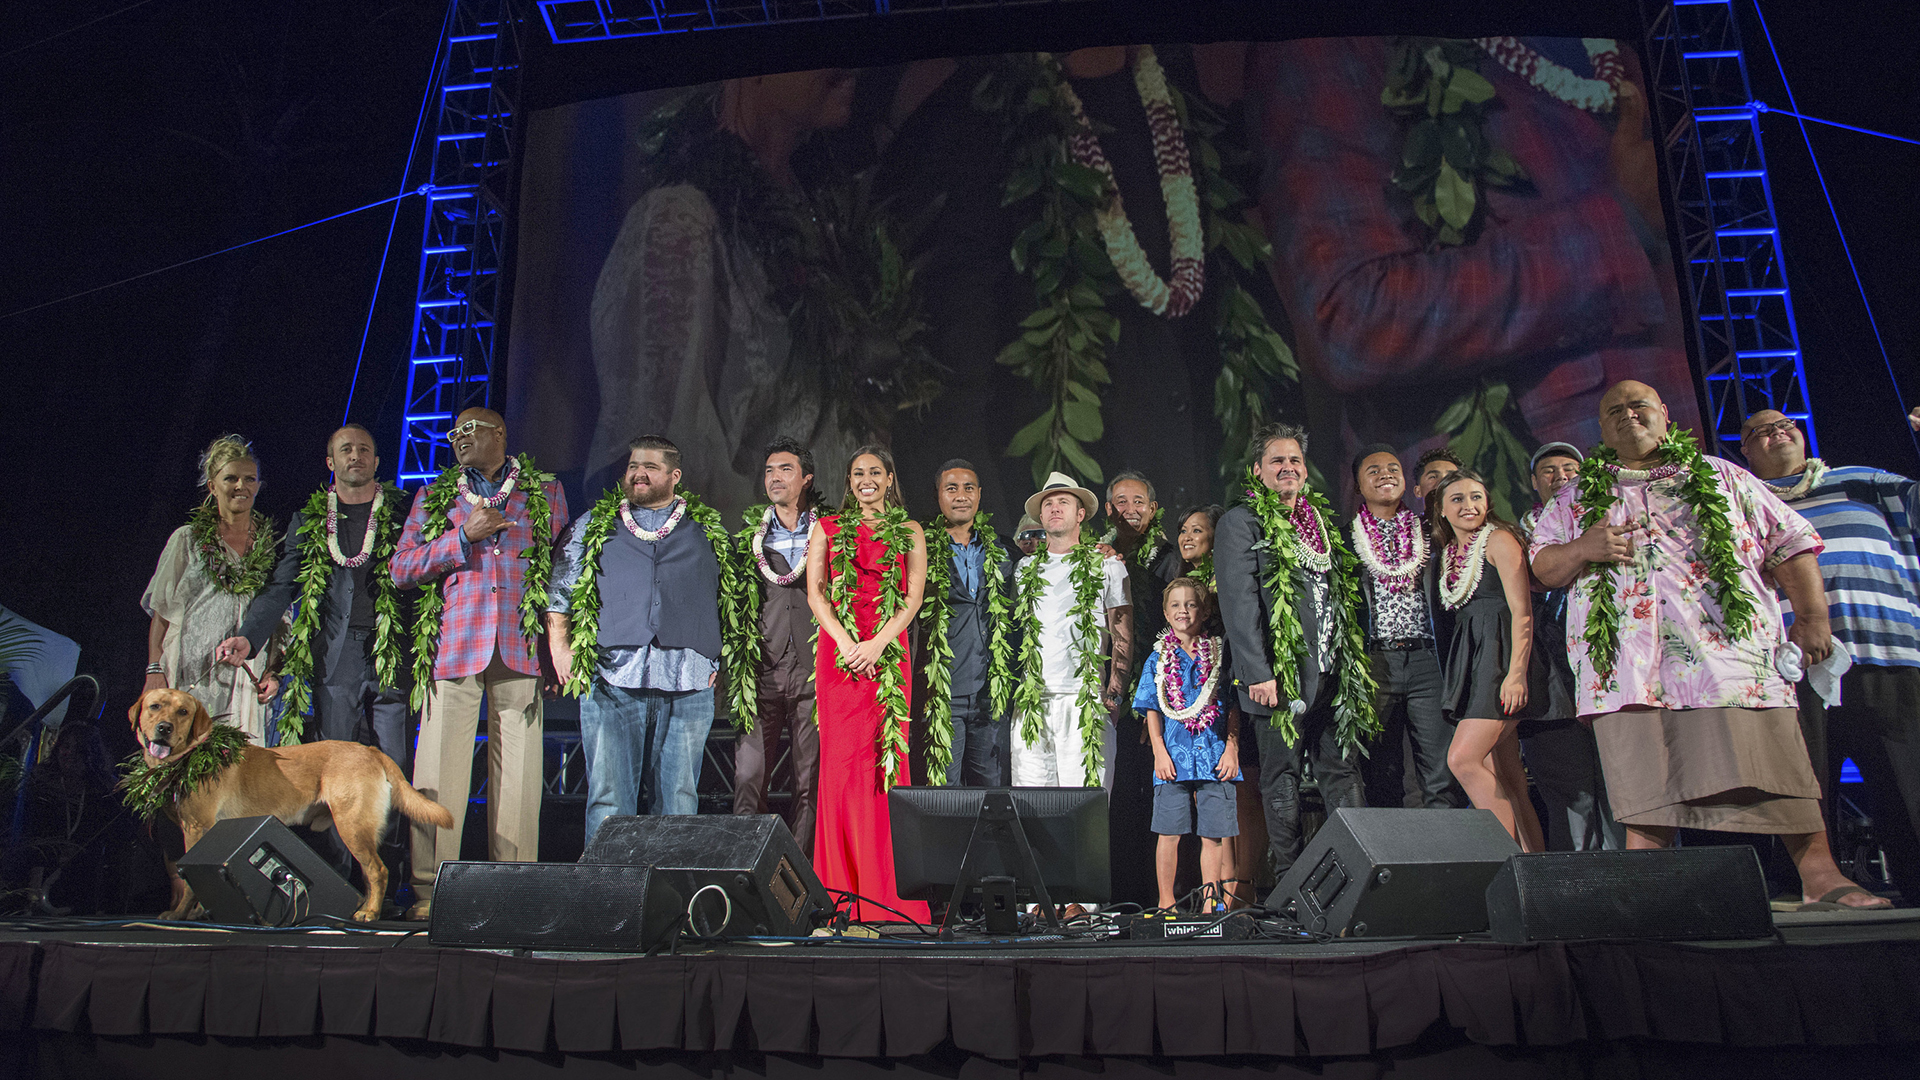 The cast of Hawaii Five-0 join together on stage to thank everyone attending this year's Sunset on the Beach.